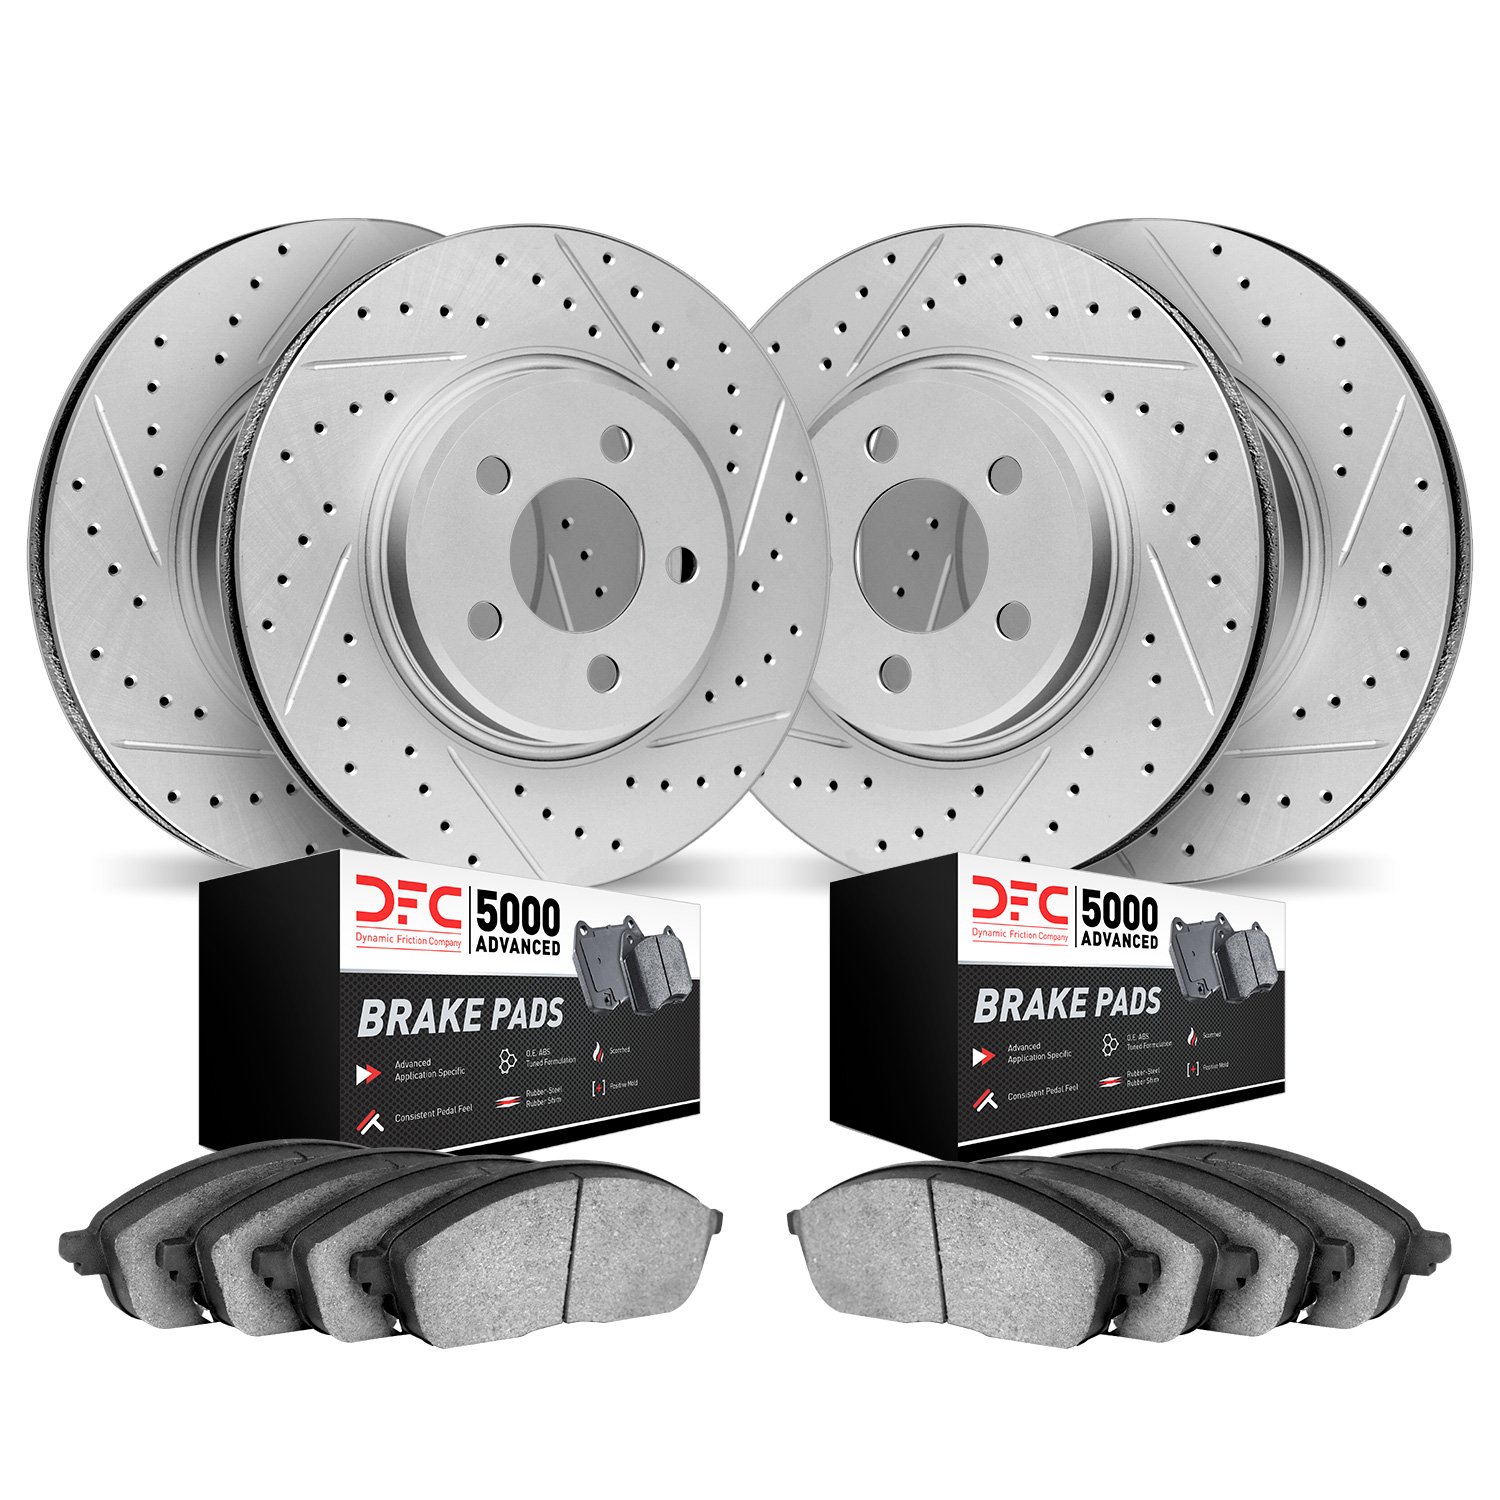 2504-39013 Geoperformance Drilled/Slotted Rotors w/5000 Advanced Brake Pads Kit, Fits Select Mopar, Position: Front and Rear